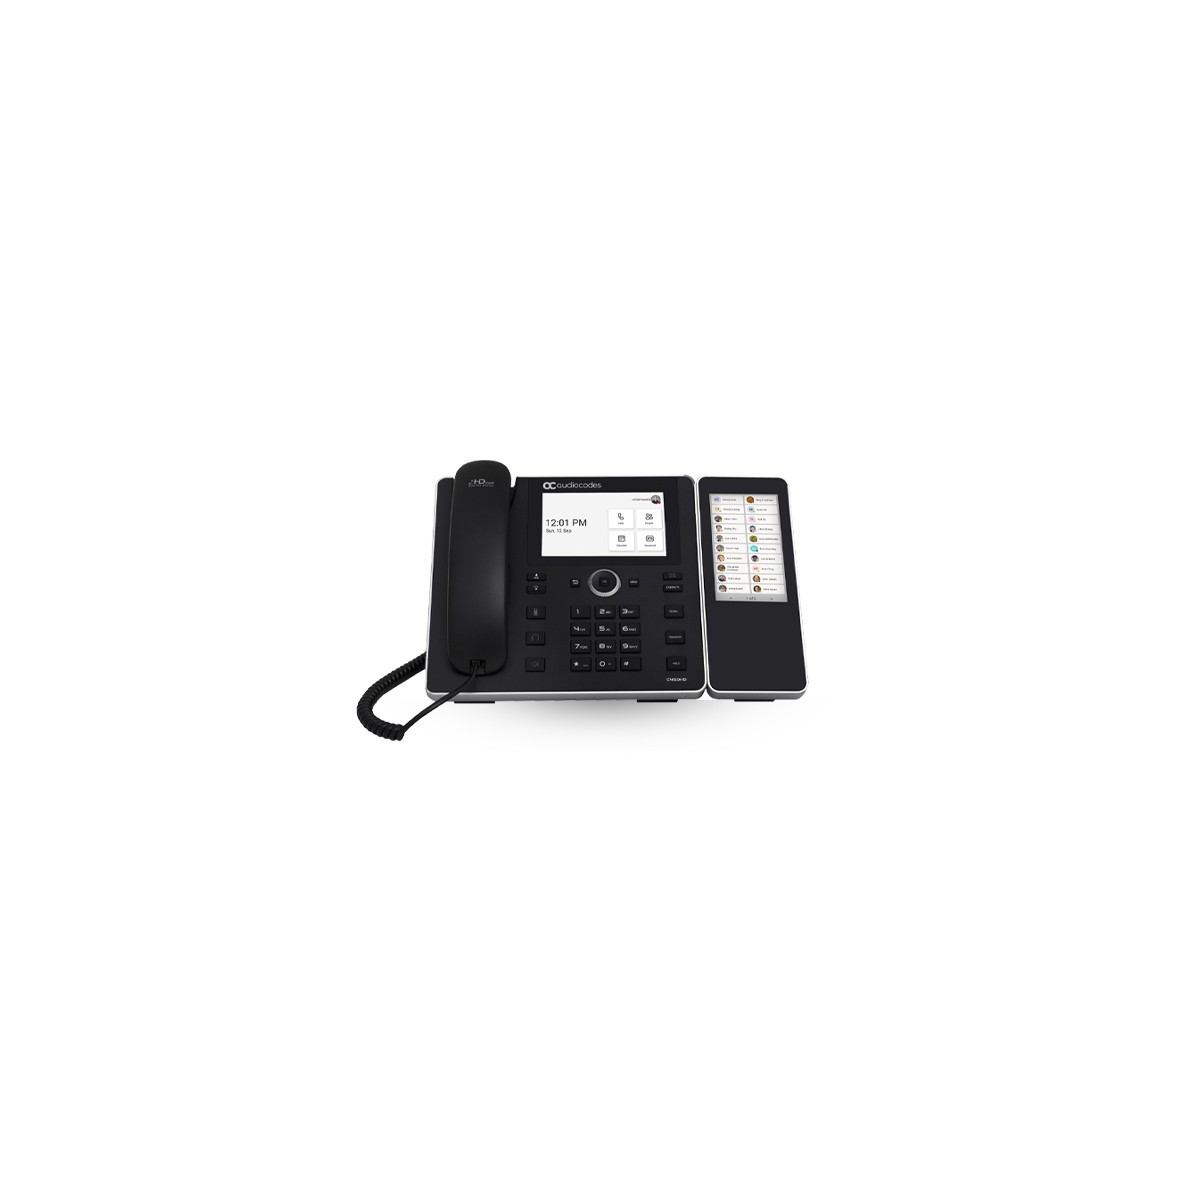 AudioCodes Teams C455HD IP-Phone PoE GbE black with integrated BT and Dual Band - VoIP-Telefon - TCP-IP